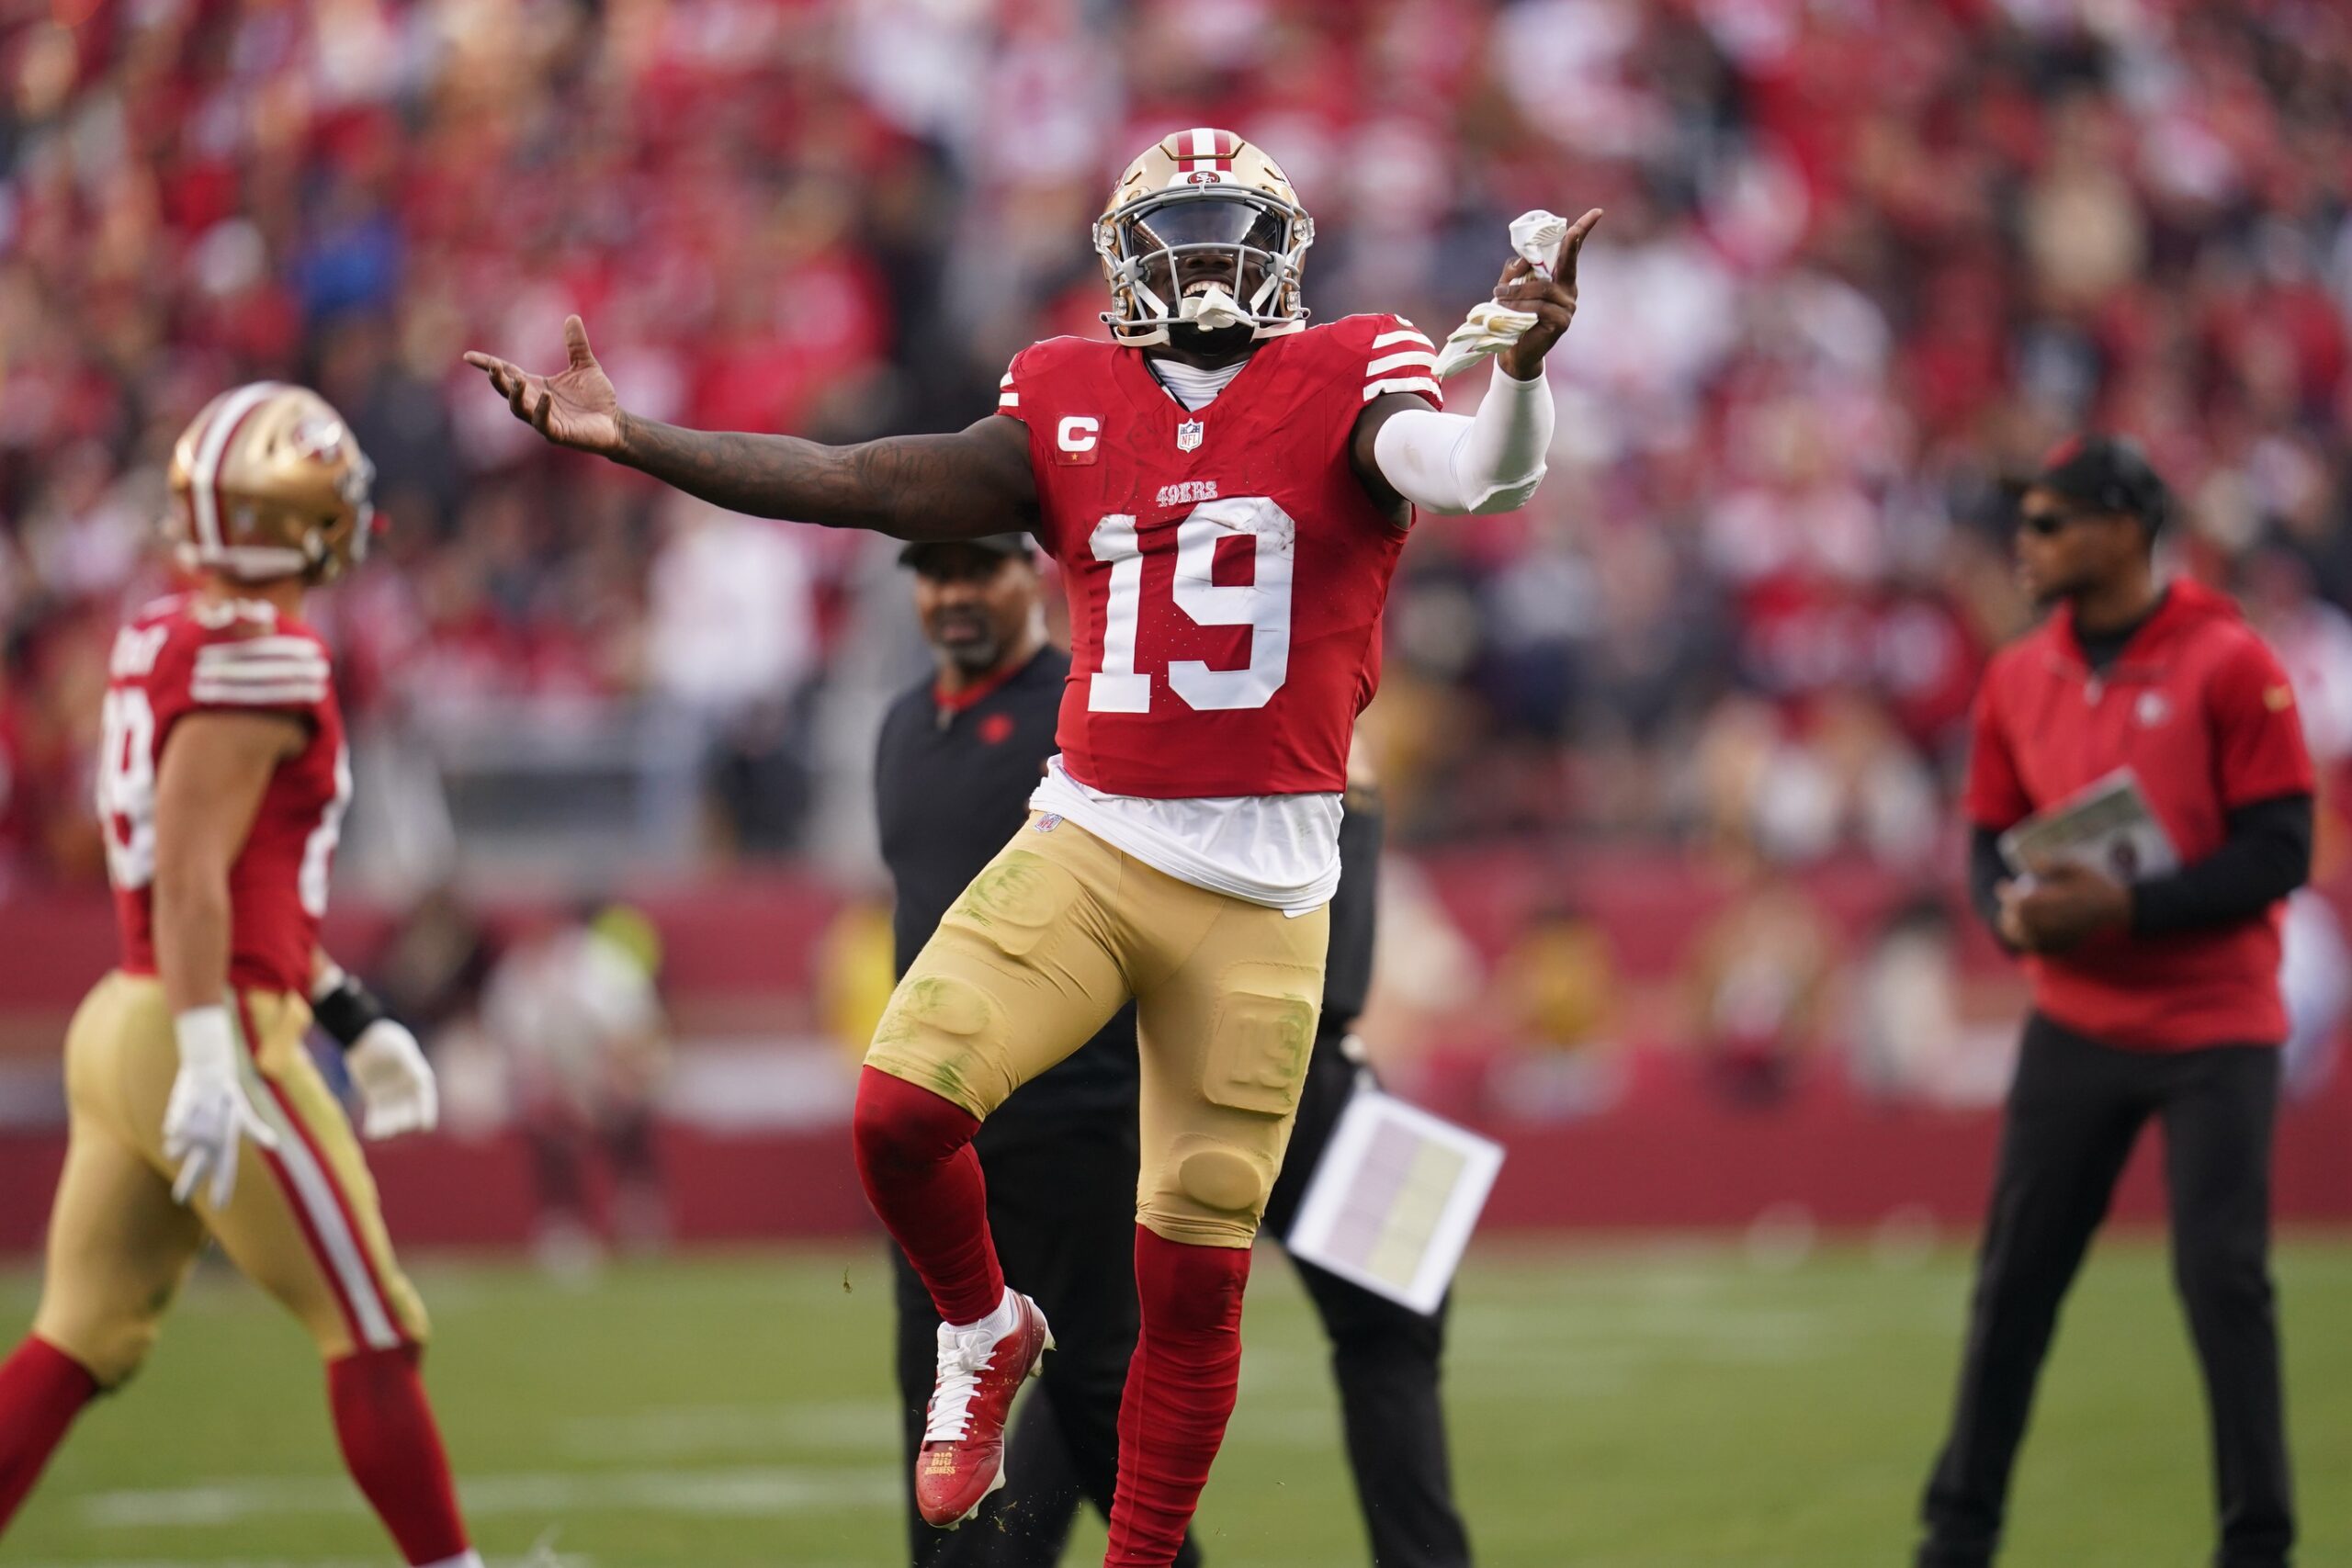 deebo samuel injury update: what we know about the san francisco 49ers wr